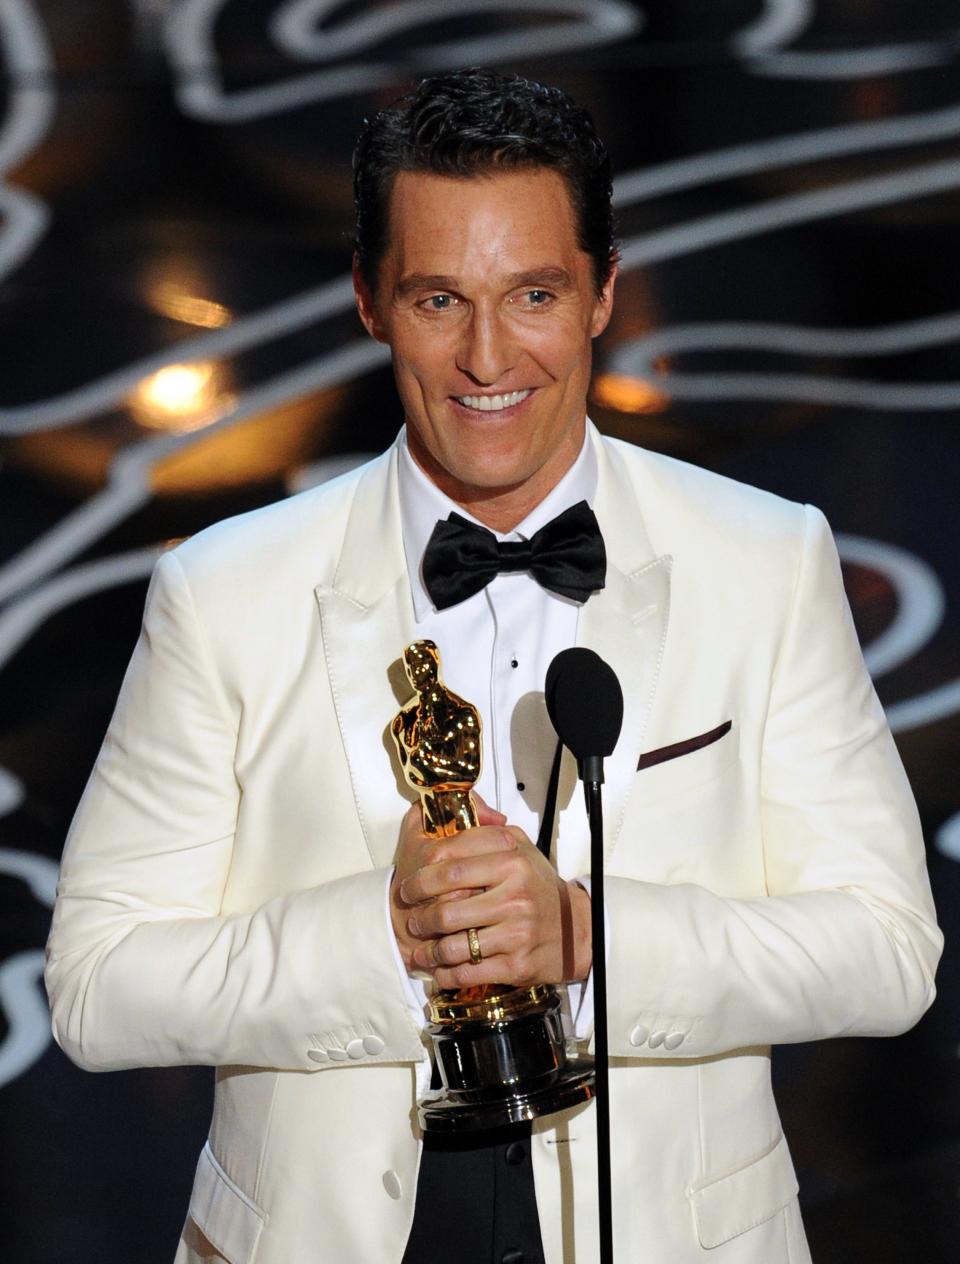 Matthew McConaughey accepts the Best Performance by an Actor in a Leading Role award for 'Dallas Buyers Club' onstage during the Oscars at the Dolby Theatre on March 2, 2014 in Hollywood, California.